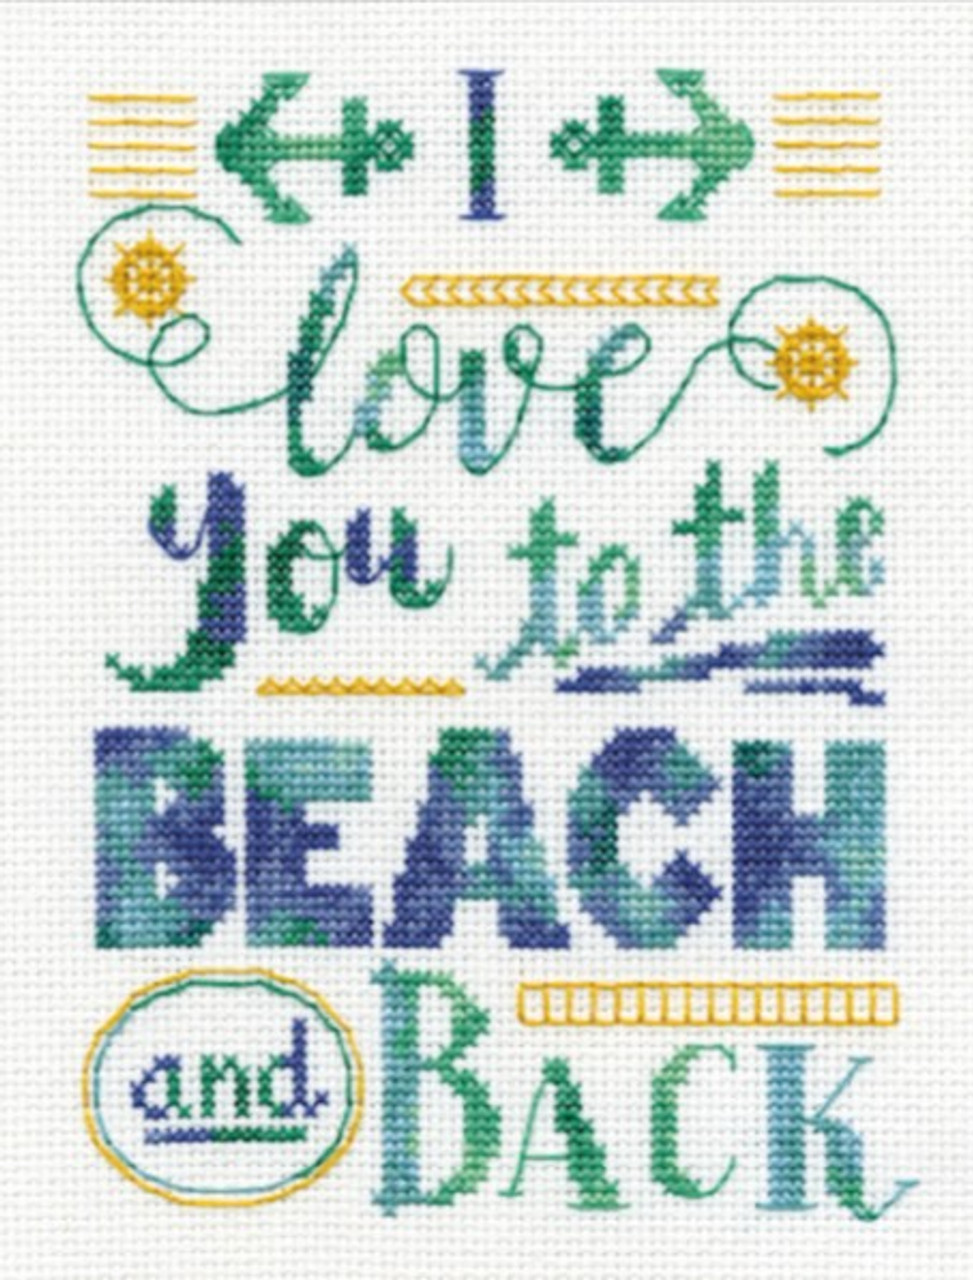 Dimensions To the Beach and Back counted cross-stitch Kit with 14-count aida, needle, threads & wooden hanger - 8" x 11.5" finished